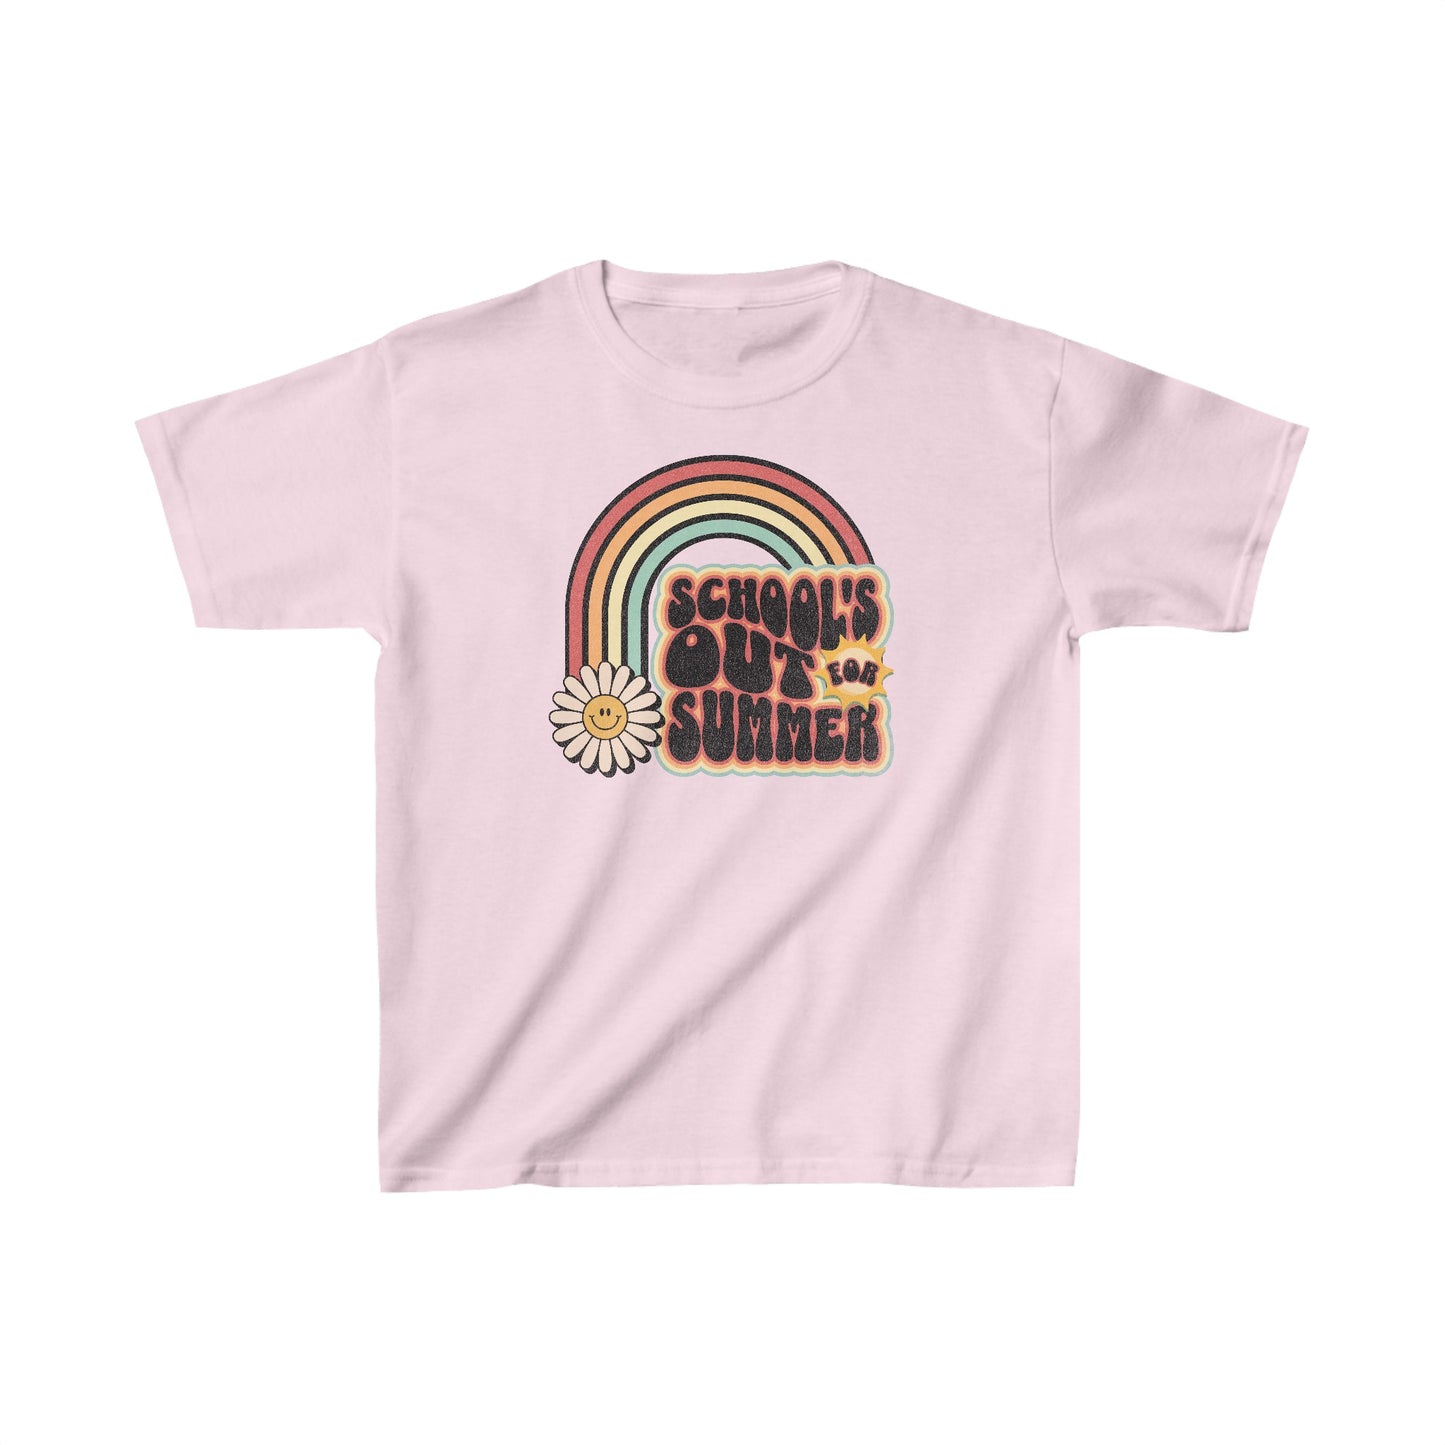 School's out for Summer - Kids Heavy Cotton™ Tee